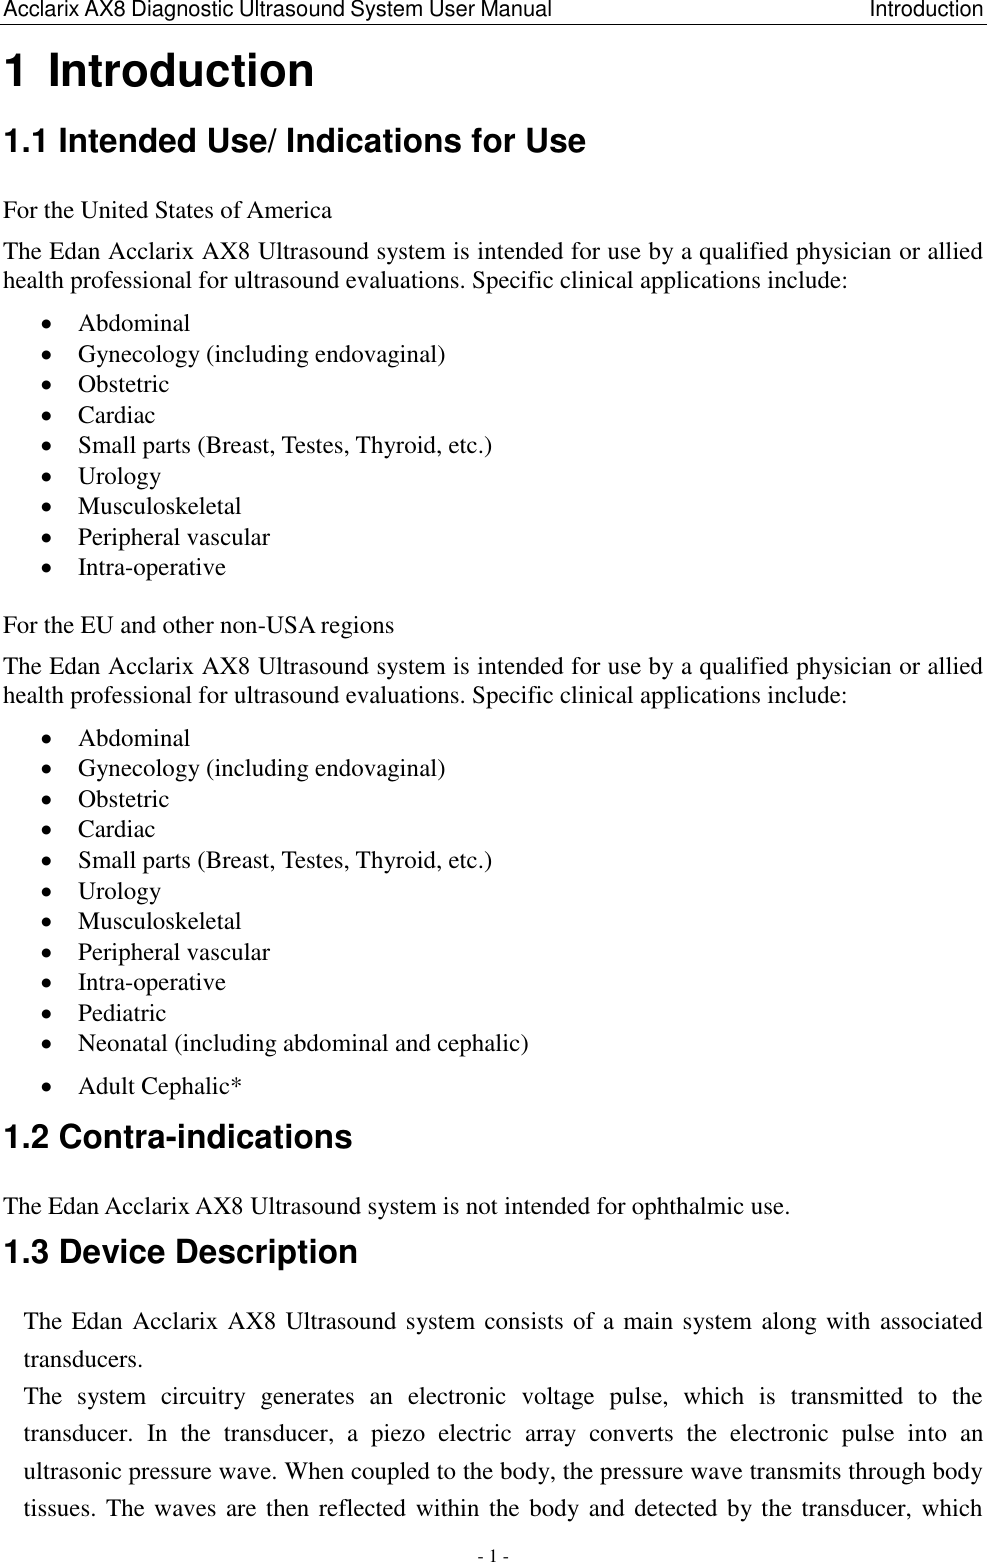 Acclarix AX8 Diagnostic Ultrasound System User Manual                                                          Introduction - 1 - 1 Introduction 1.1 Intended Use/ Indications for Use For the United States of America The Edan Acclarix AX8 Ultrasound system is intended for use by a qualified physician or allied health professional for ultrasound evaluations. Specific clinical applications include:  Abdominal  Gynecology (including endovaginal)  Obstetric  Cardiac  Small parts (Breast, Testes, Thyroid, etc.)  Urology  Musculoskeletal    Peripheral vascular  Intra-operative  For the EU and other non-USA regions The Edan Acclarix AX8 Ultrasound system is intended for use by a qualified physician or allied health professional for ultrasound evaluations. Specific clinical applications include:  Abdominal  Gynecology (including endovaginal)  Obstetric  Cardiac  Small parts (Breast, Testes, Thyroid, etc.)  Urology  Musculoskeletal    Peripheral vascular  Intra-operative  Pediatric  Neonatal (including abdominal and cephalic)  Adult Cephalic* 1.2 Contra-indications The Edan Acclarix AX8 Ultrasound system is not intended for ophthalmic use. 1.3 Device Description The Edan Acclarix AX8 Ultrasound system consists of a main system along with associated transducers.   The  system  circuitry  generates  an  electronic  voltage  pulse,  which  is  transmitted  to  the transducer.  In  the  transducer,  a  piezo  electric  array  converts  the  electronic  pulse  into  an ultrasonic pressure wave. When coupled to the body, the pressure wave transmits through body tissues. The waves are then reflected within the body and detected by the transducer, which 